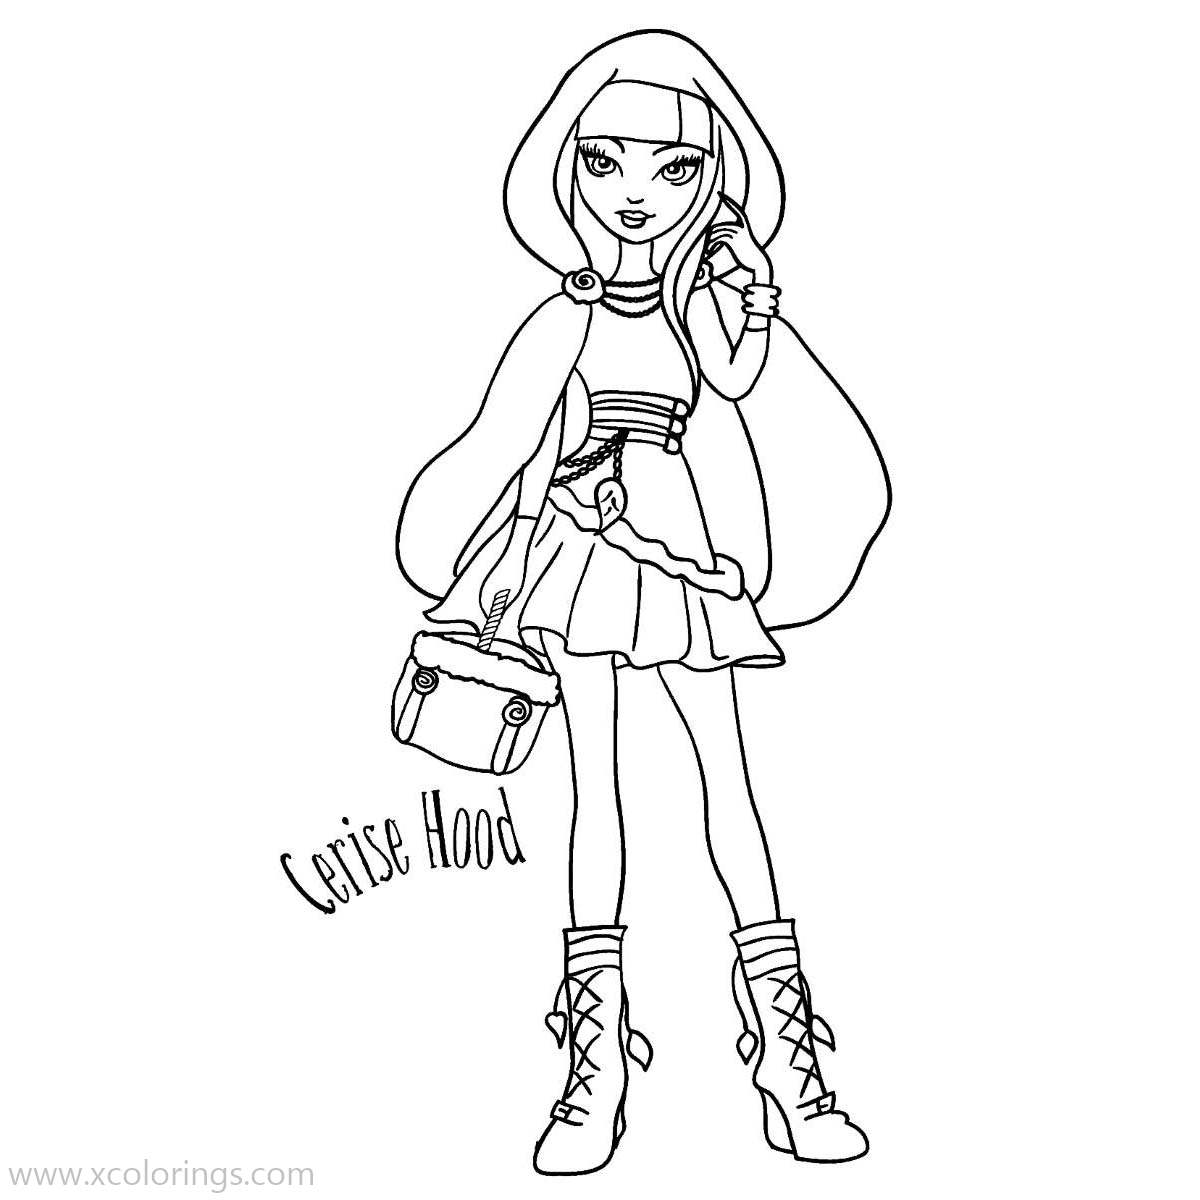 Free Ever After High Dolls Cerise Hood Coloring Pages printable